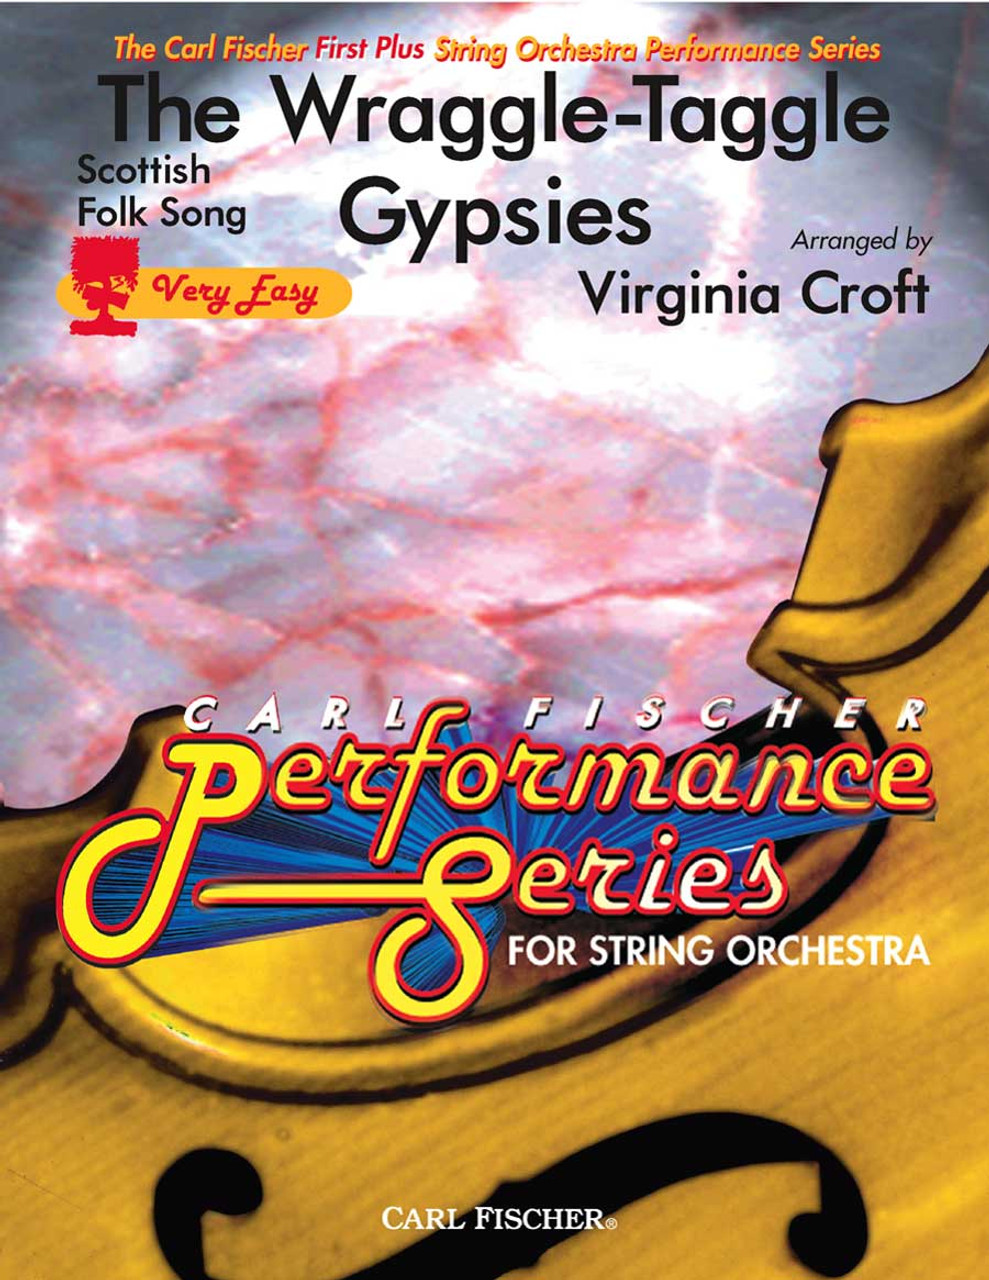 The Wraggle-Taggle Gypsies [CF:FAS41] - Performers Music